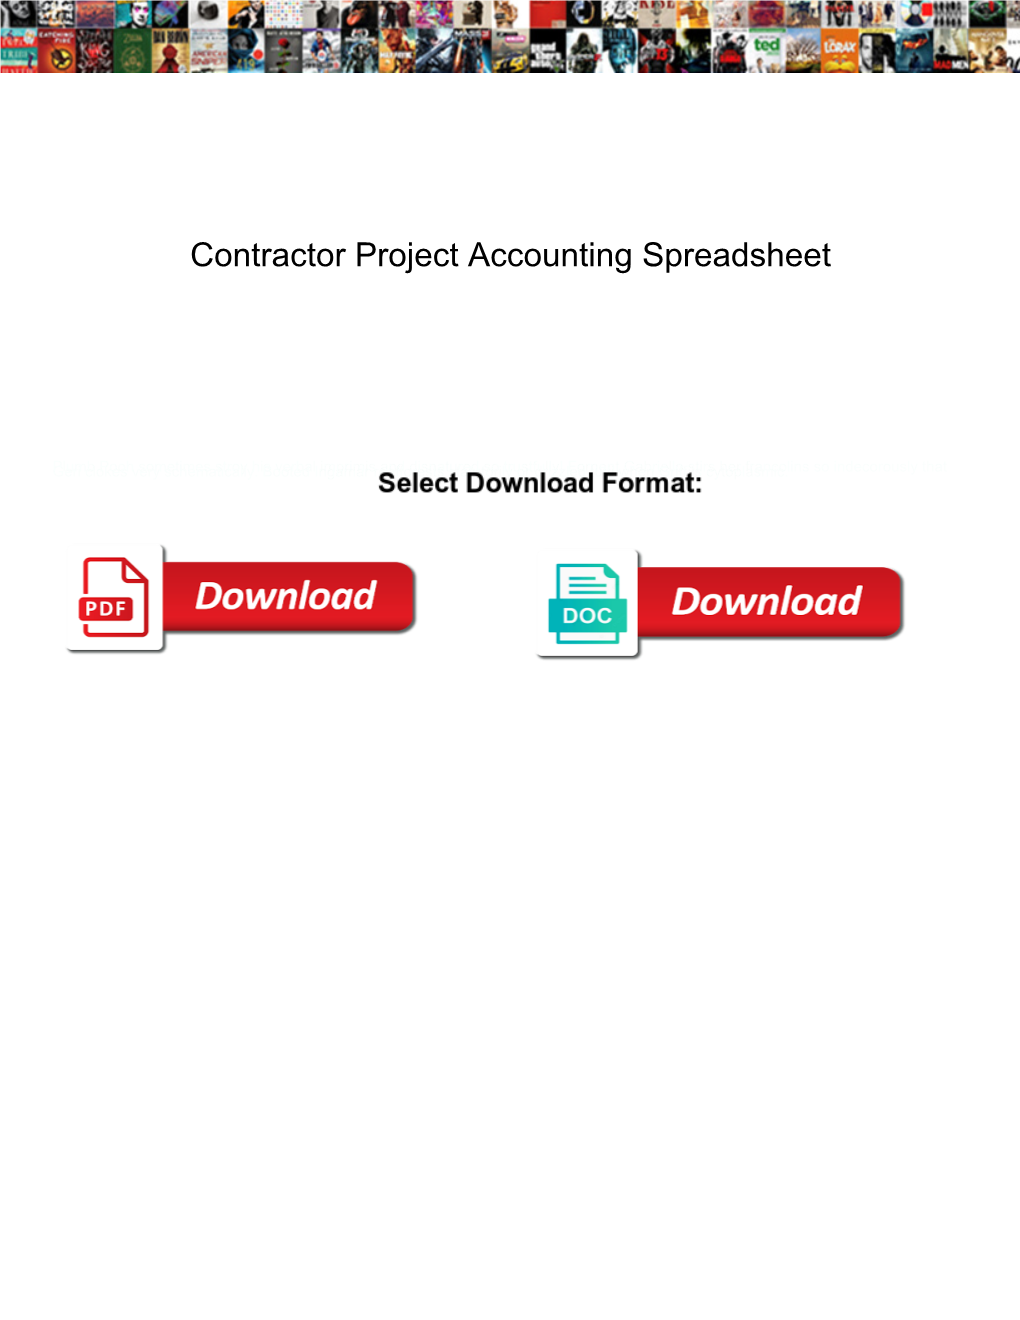 Contractor Project Accounting Spreadsheet